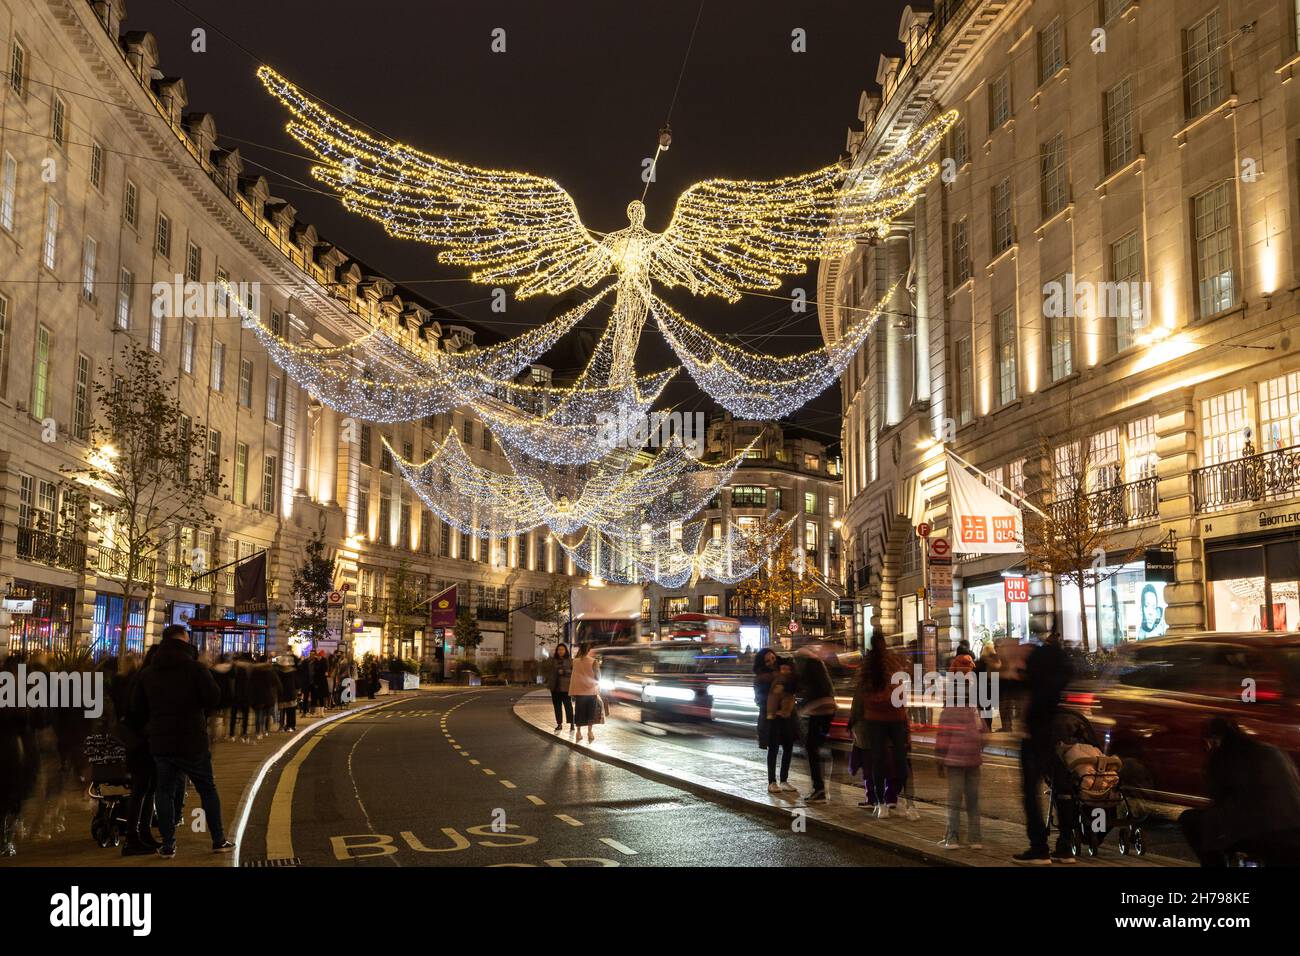 LONDON, UK - 20TH NOV 2021: Views along Regent Street in London at Christmas showing the decorations and outside of shops. People can be seen outside. Stock Photo